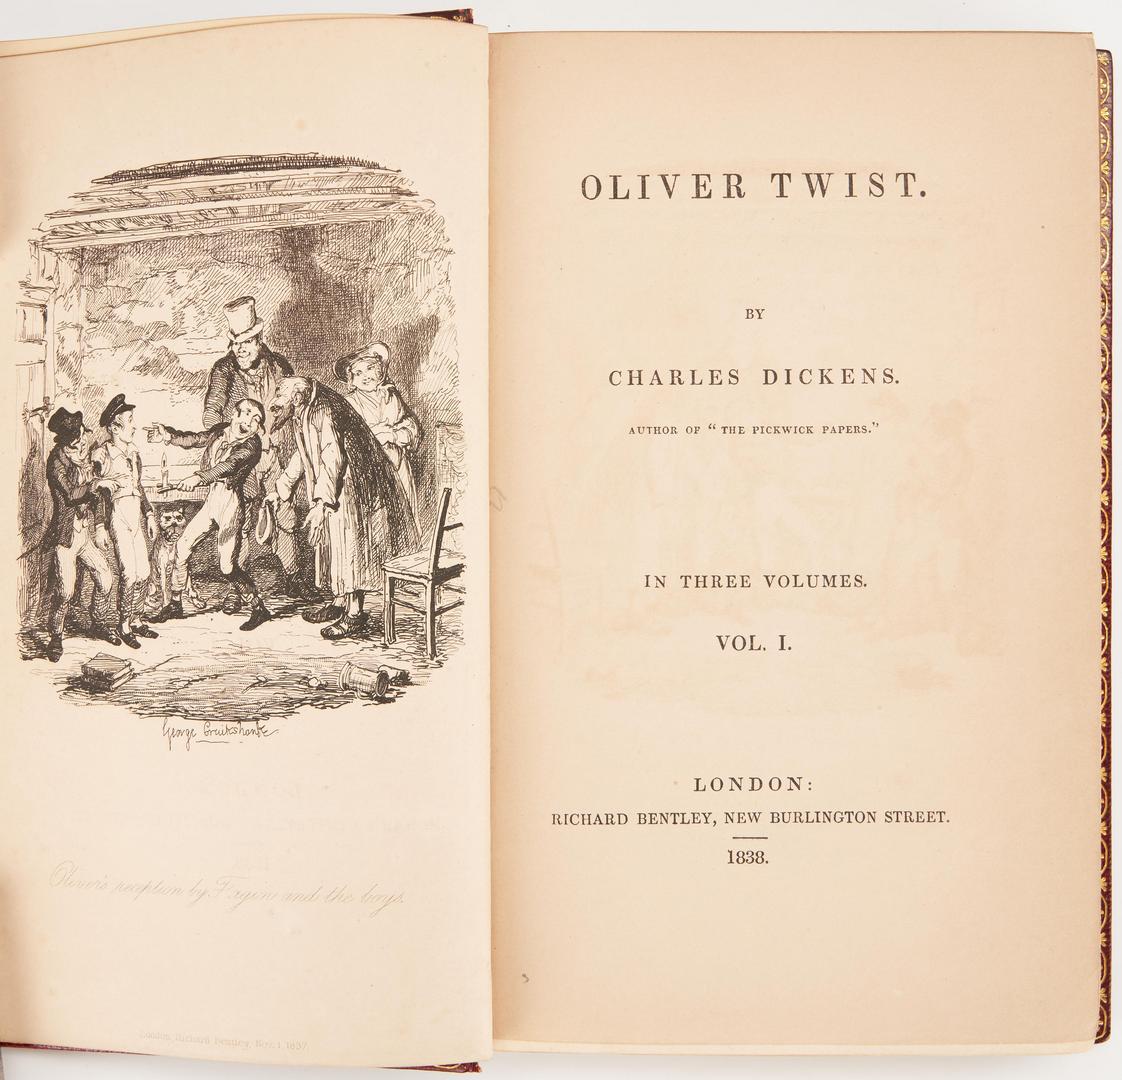 Lot 1008: Dickens, Twist & Copperfield, 1st Eds., 4 items